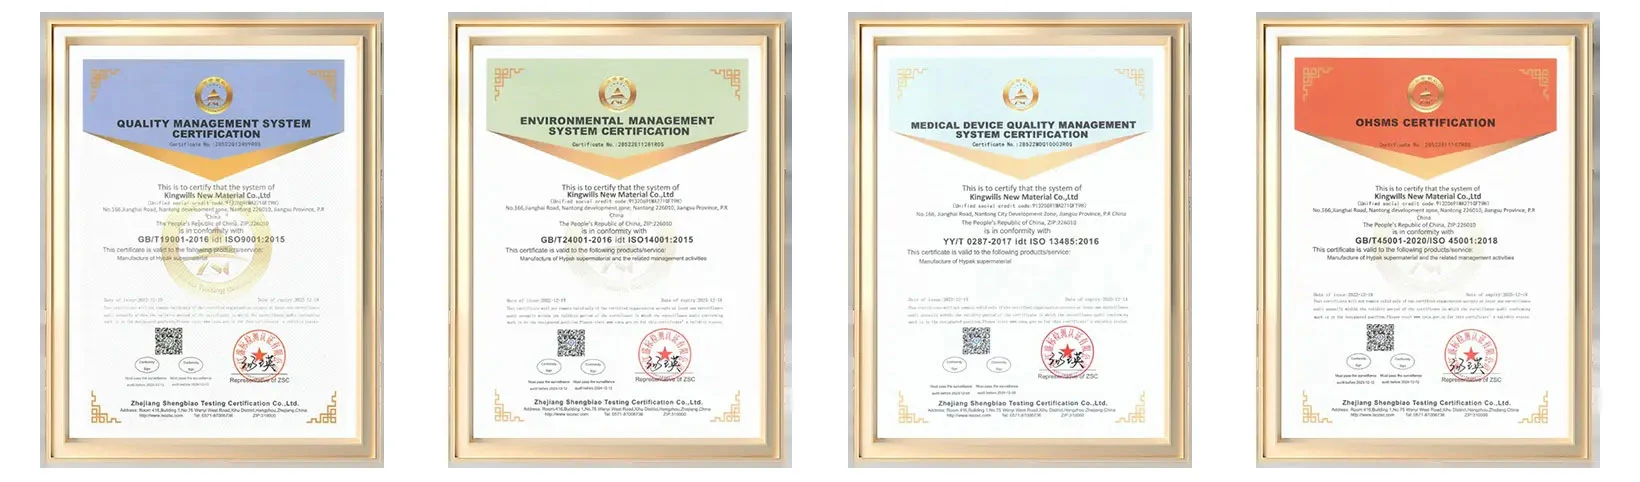 Kingwills™ Flashspun Hypak™ has obtained ISO 13485, 9001, 14001 and 45001 system certification.